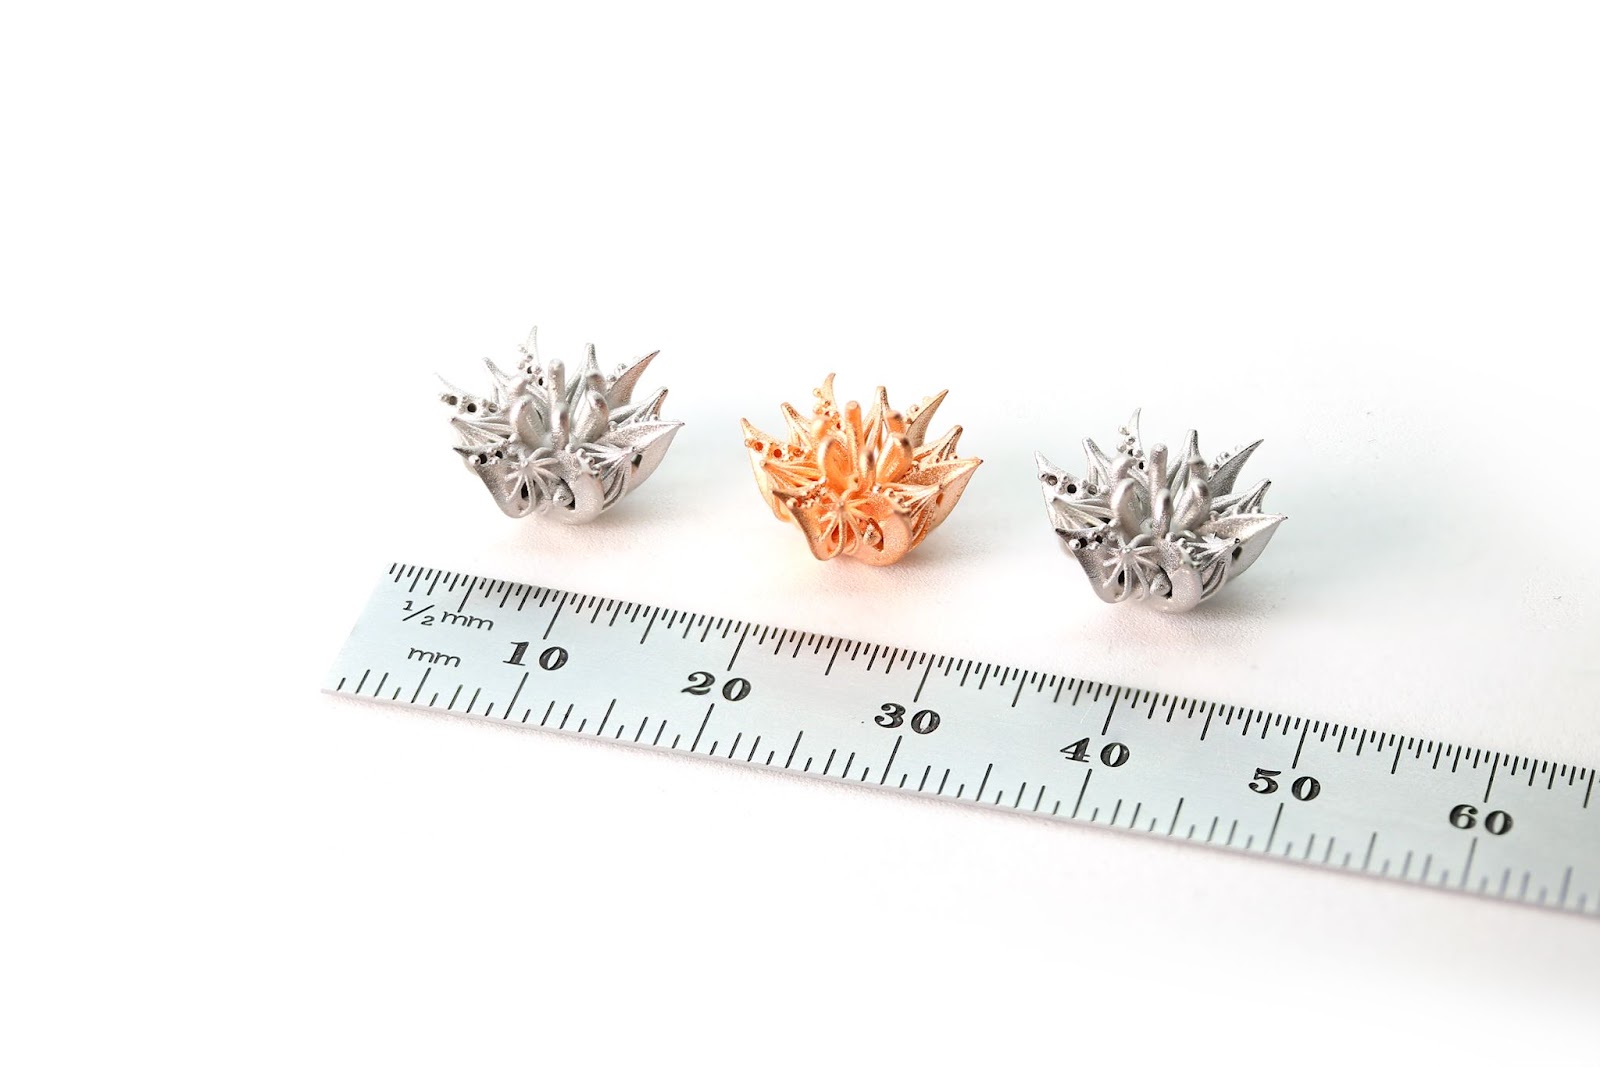 Three versions of a jewelry component, two made from stainless steels and one in copper, next to a metric ruler. Each part is roughly 10mm at their widest